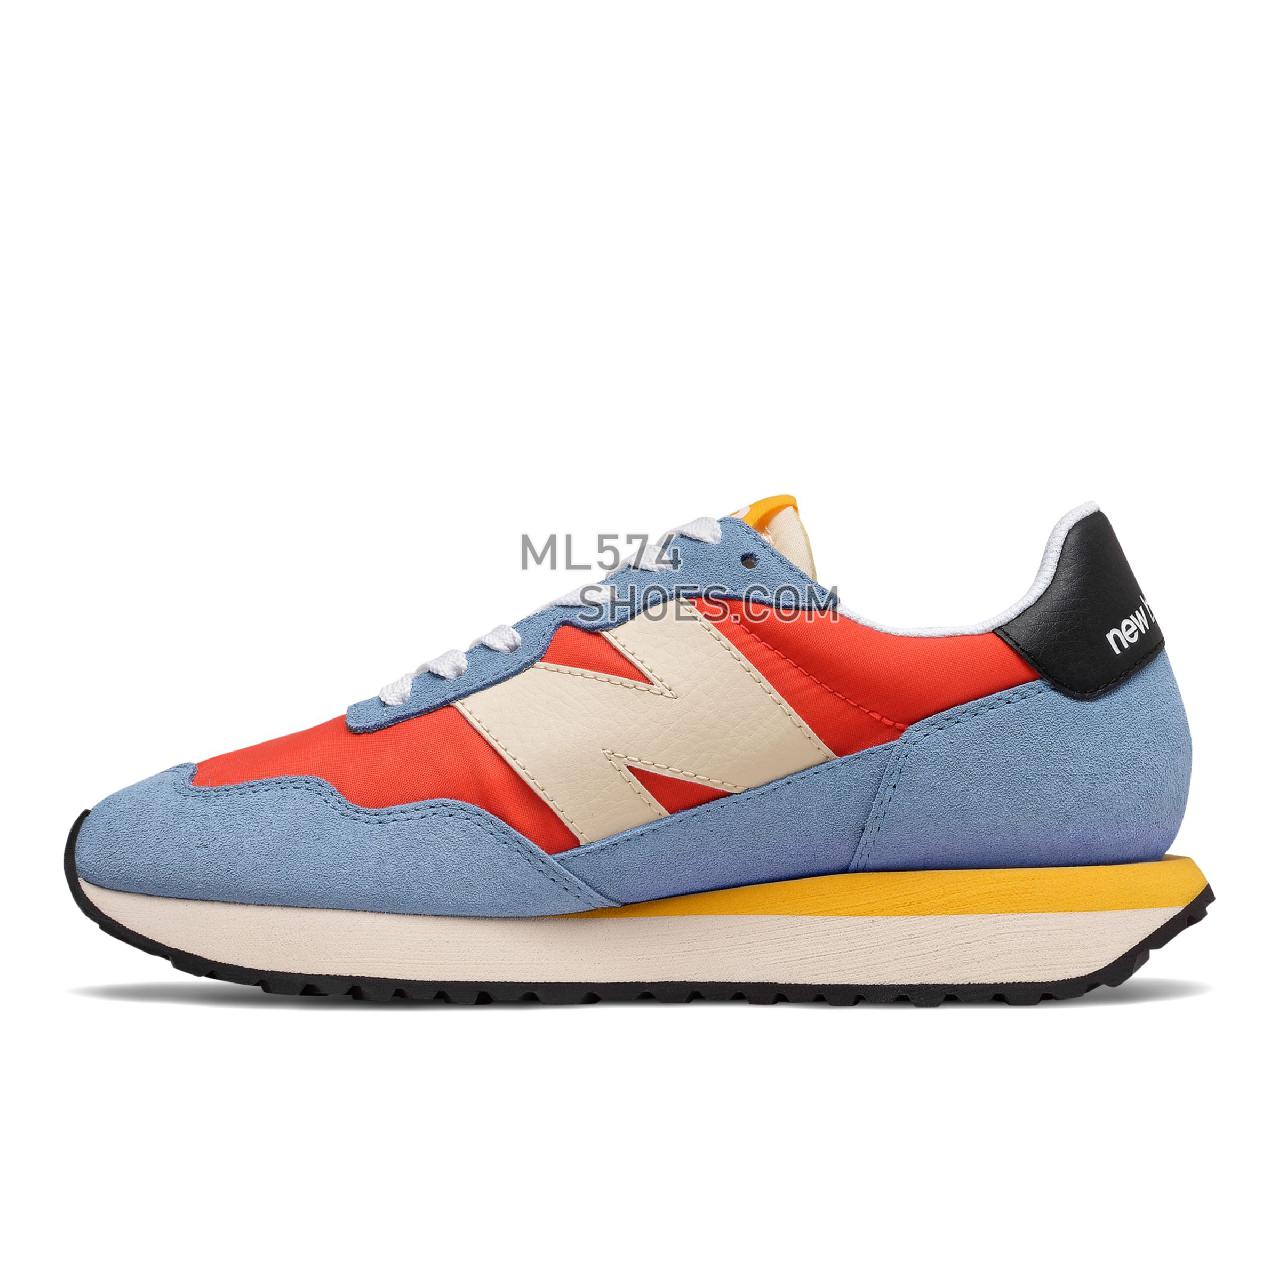 New Balance 237 - Women's Classic Sneakers - Ghost Pepper with Stellar Blue - WS237SD